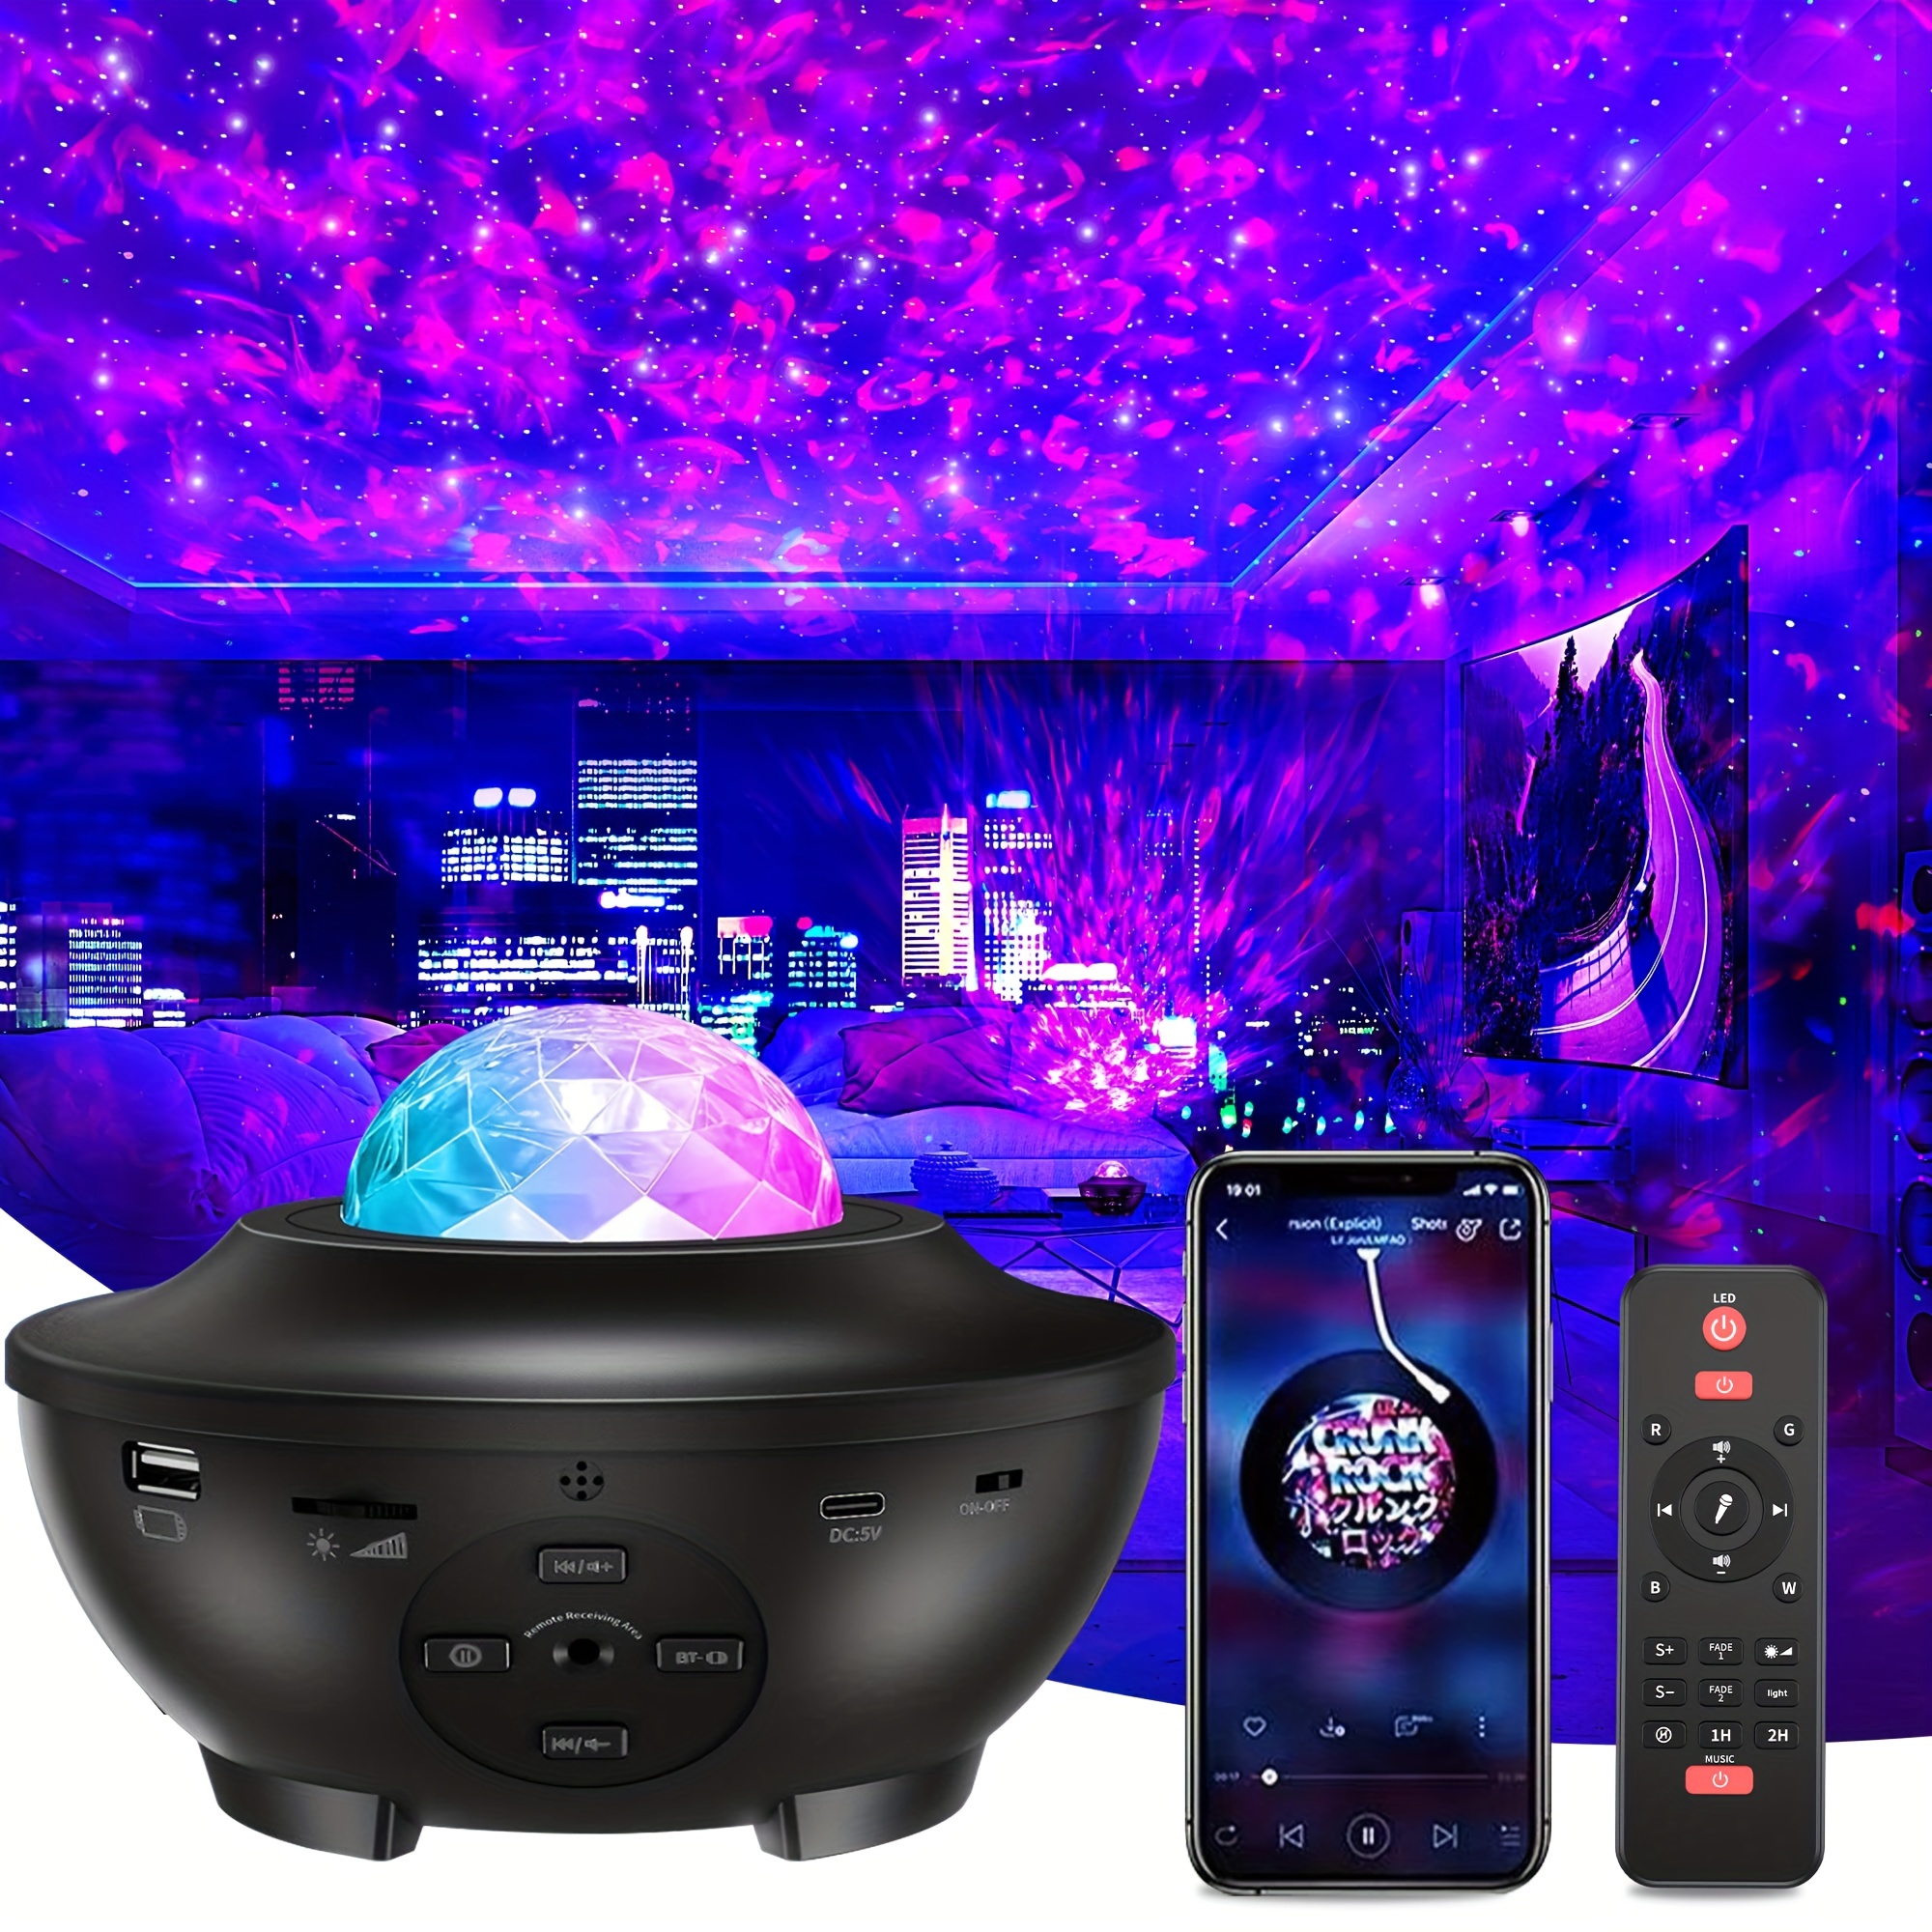 cell phone hologram projector